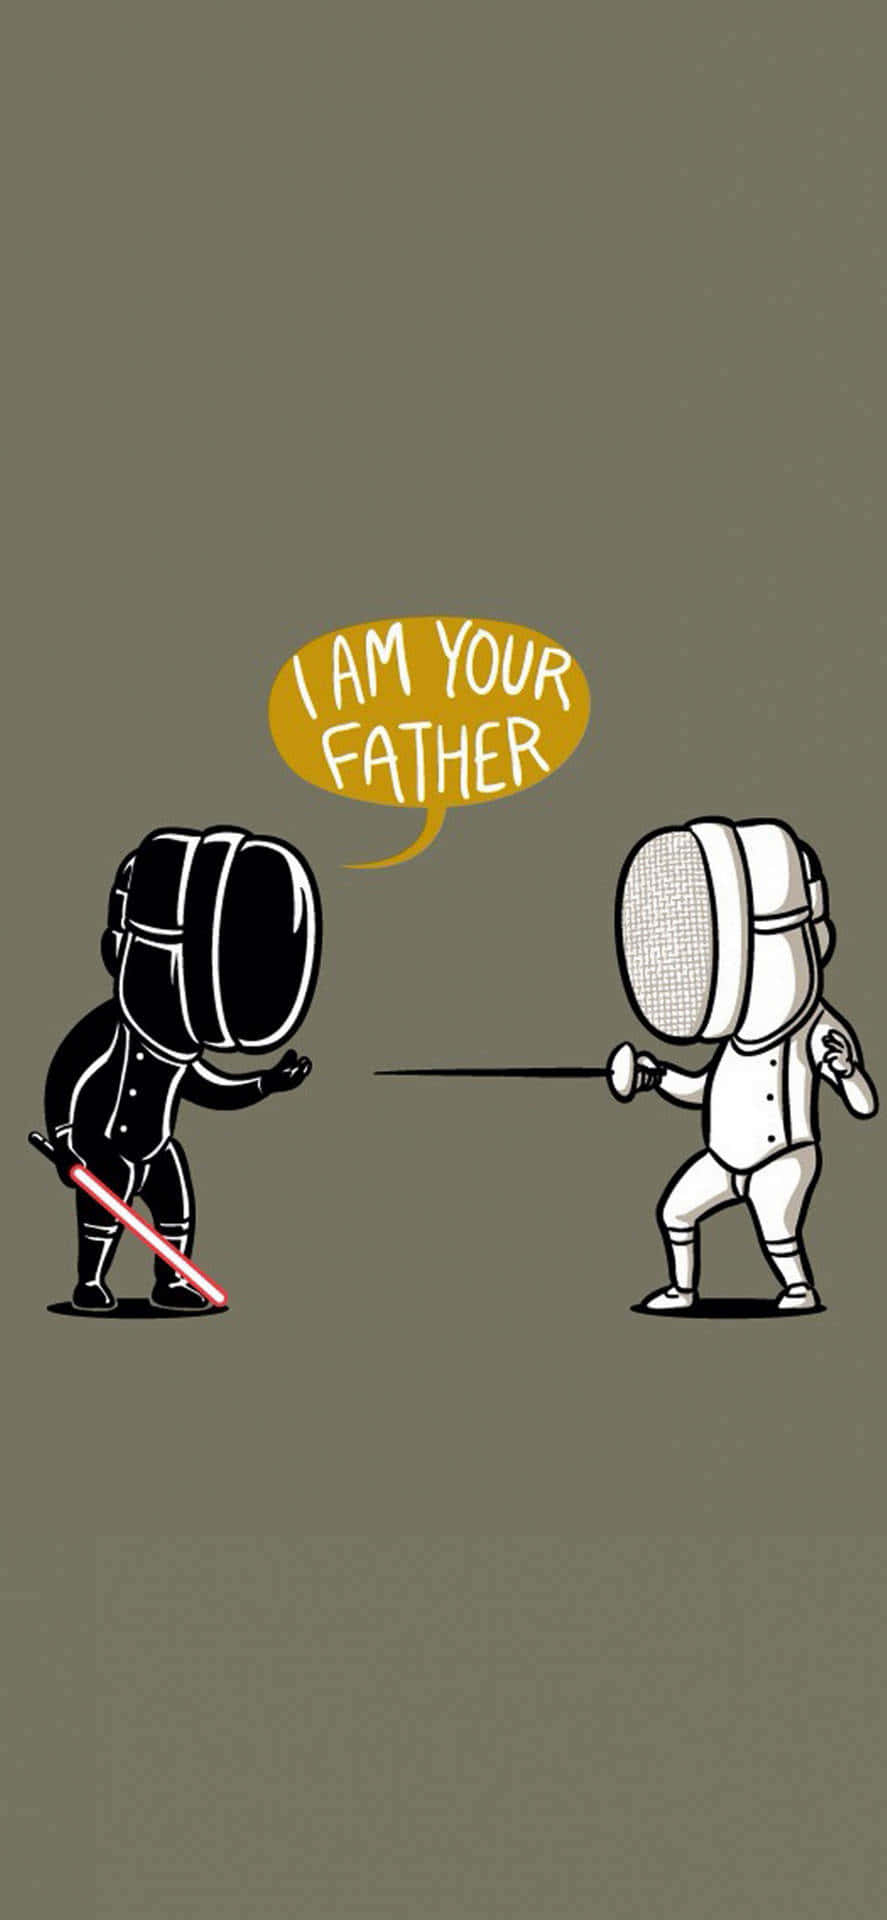 Funny Star Wars iPhone Wallpapers on WallpaperDog